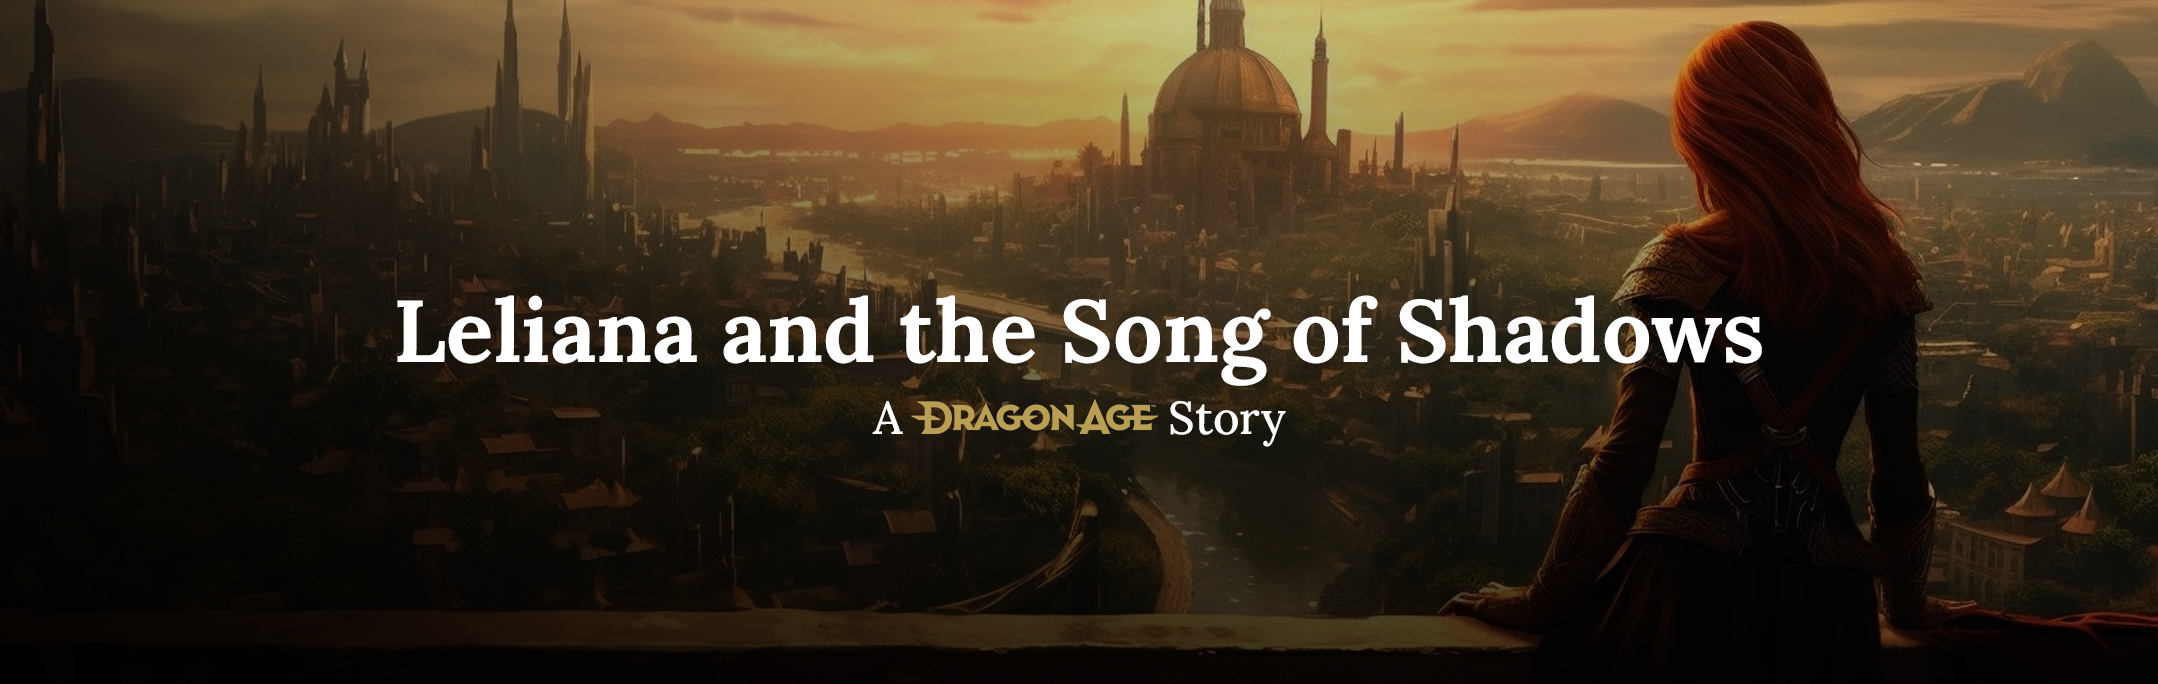 Leliana and the Song of Shadows - A Dragon Age Story